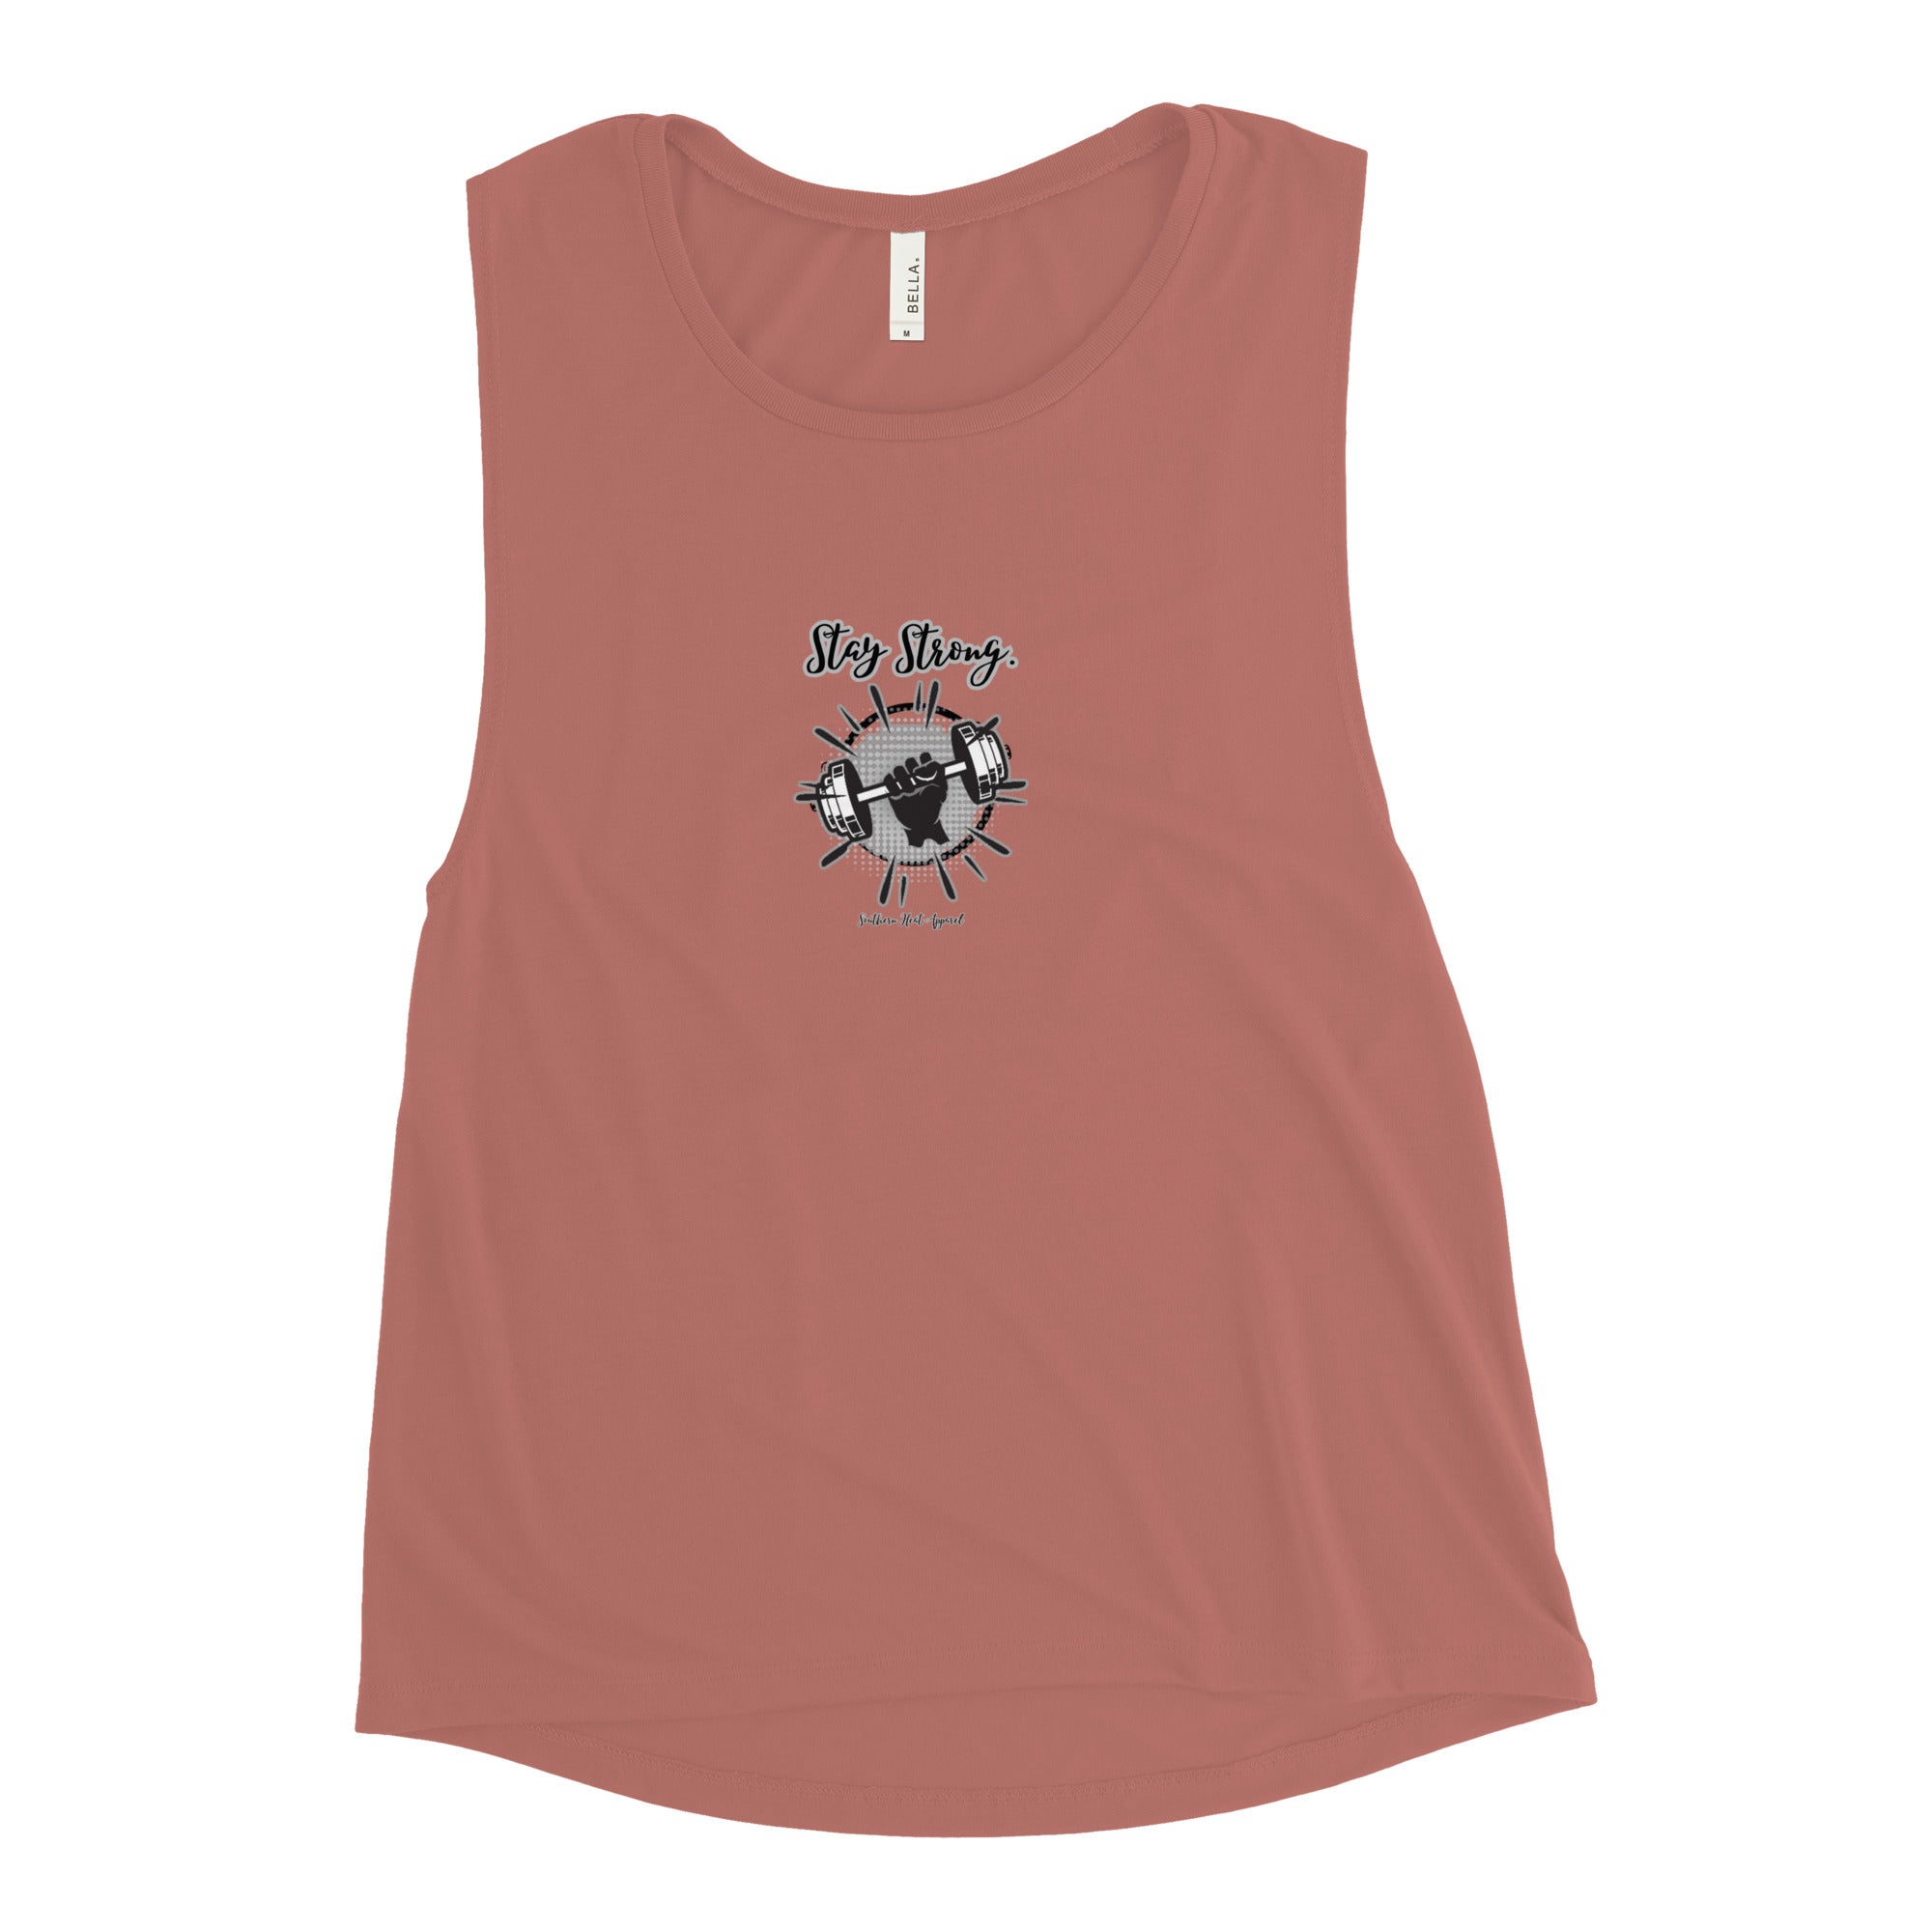 Stay strong-Ladies’ Muscle Tank